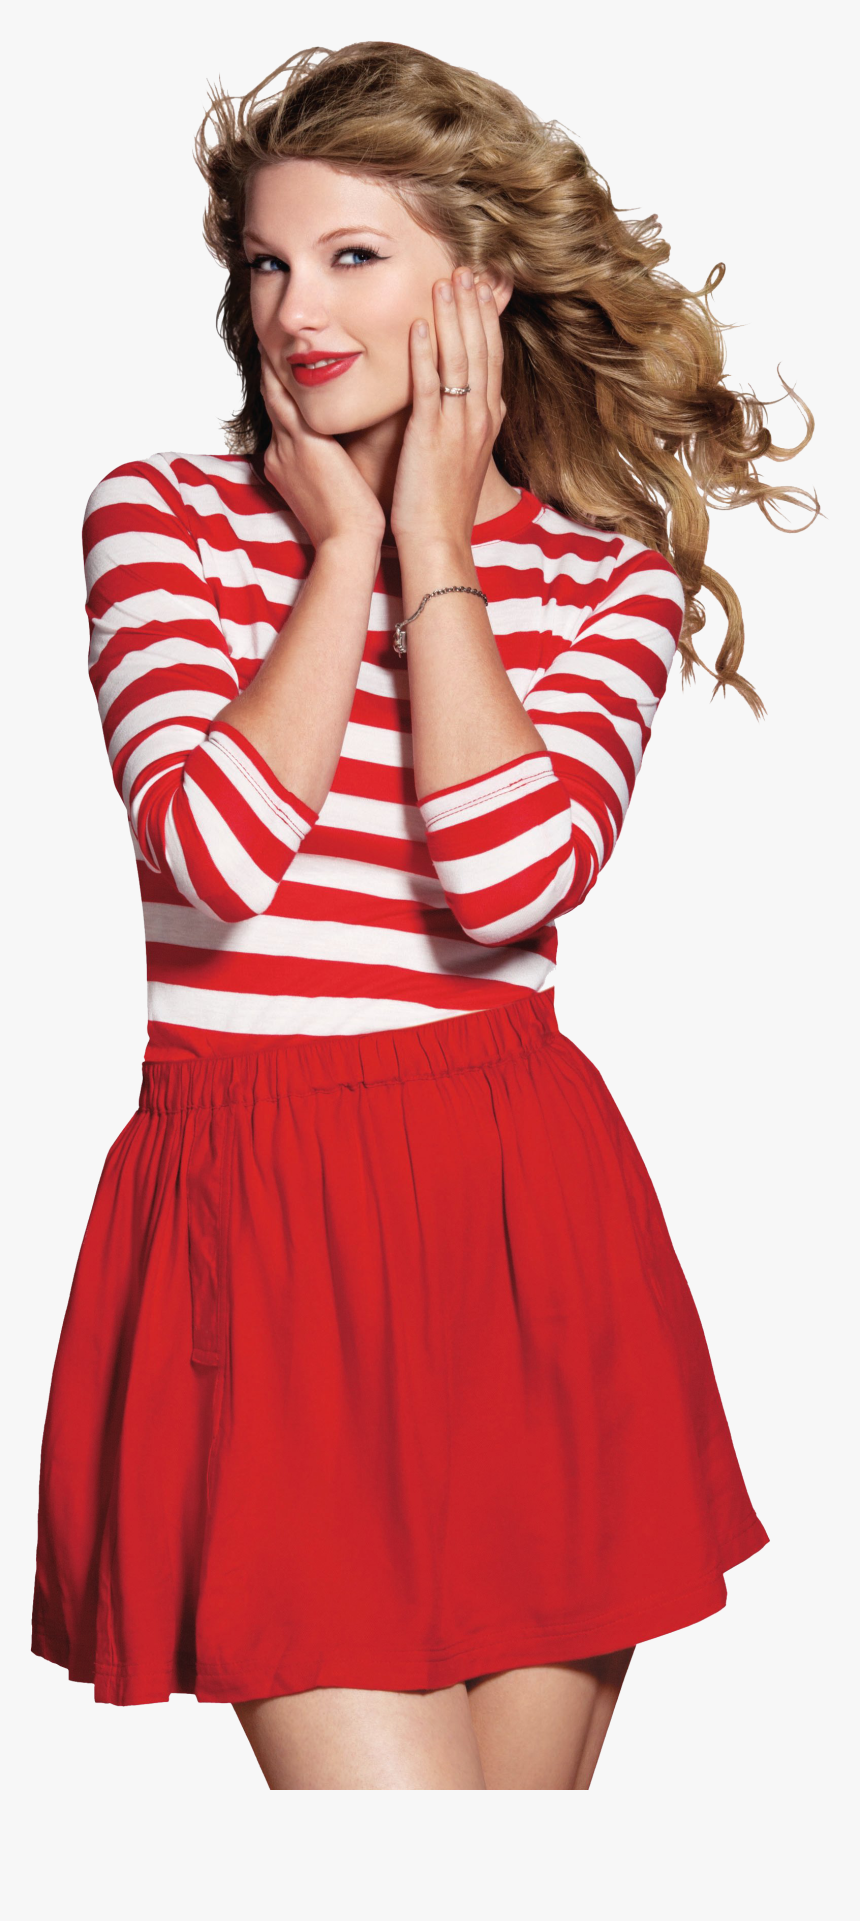 Cz - Taylor Swift Red Tour Download, HD Png Download, Free Download